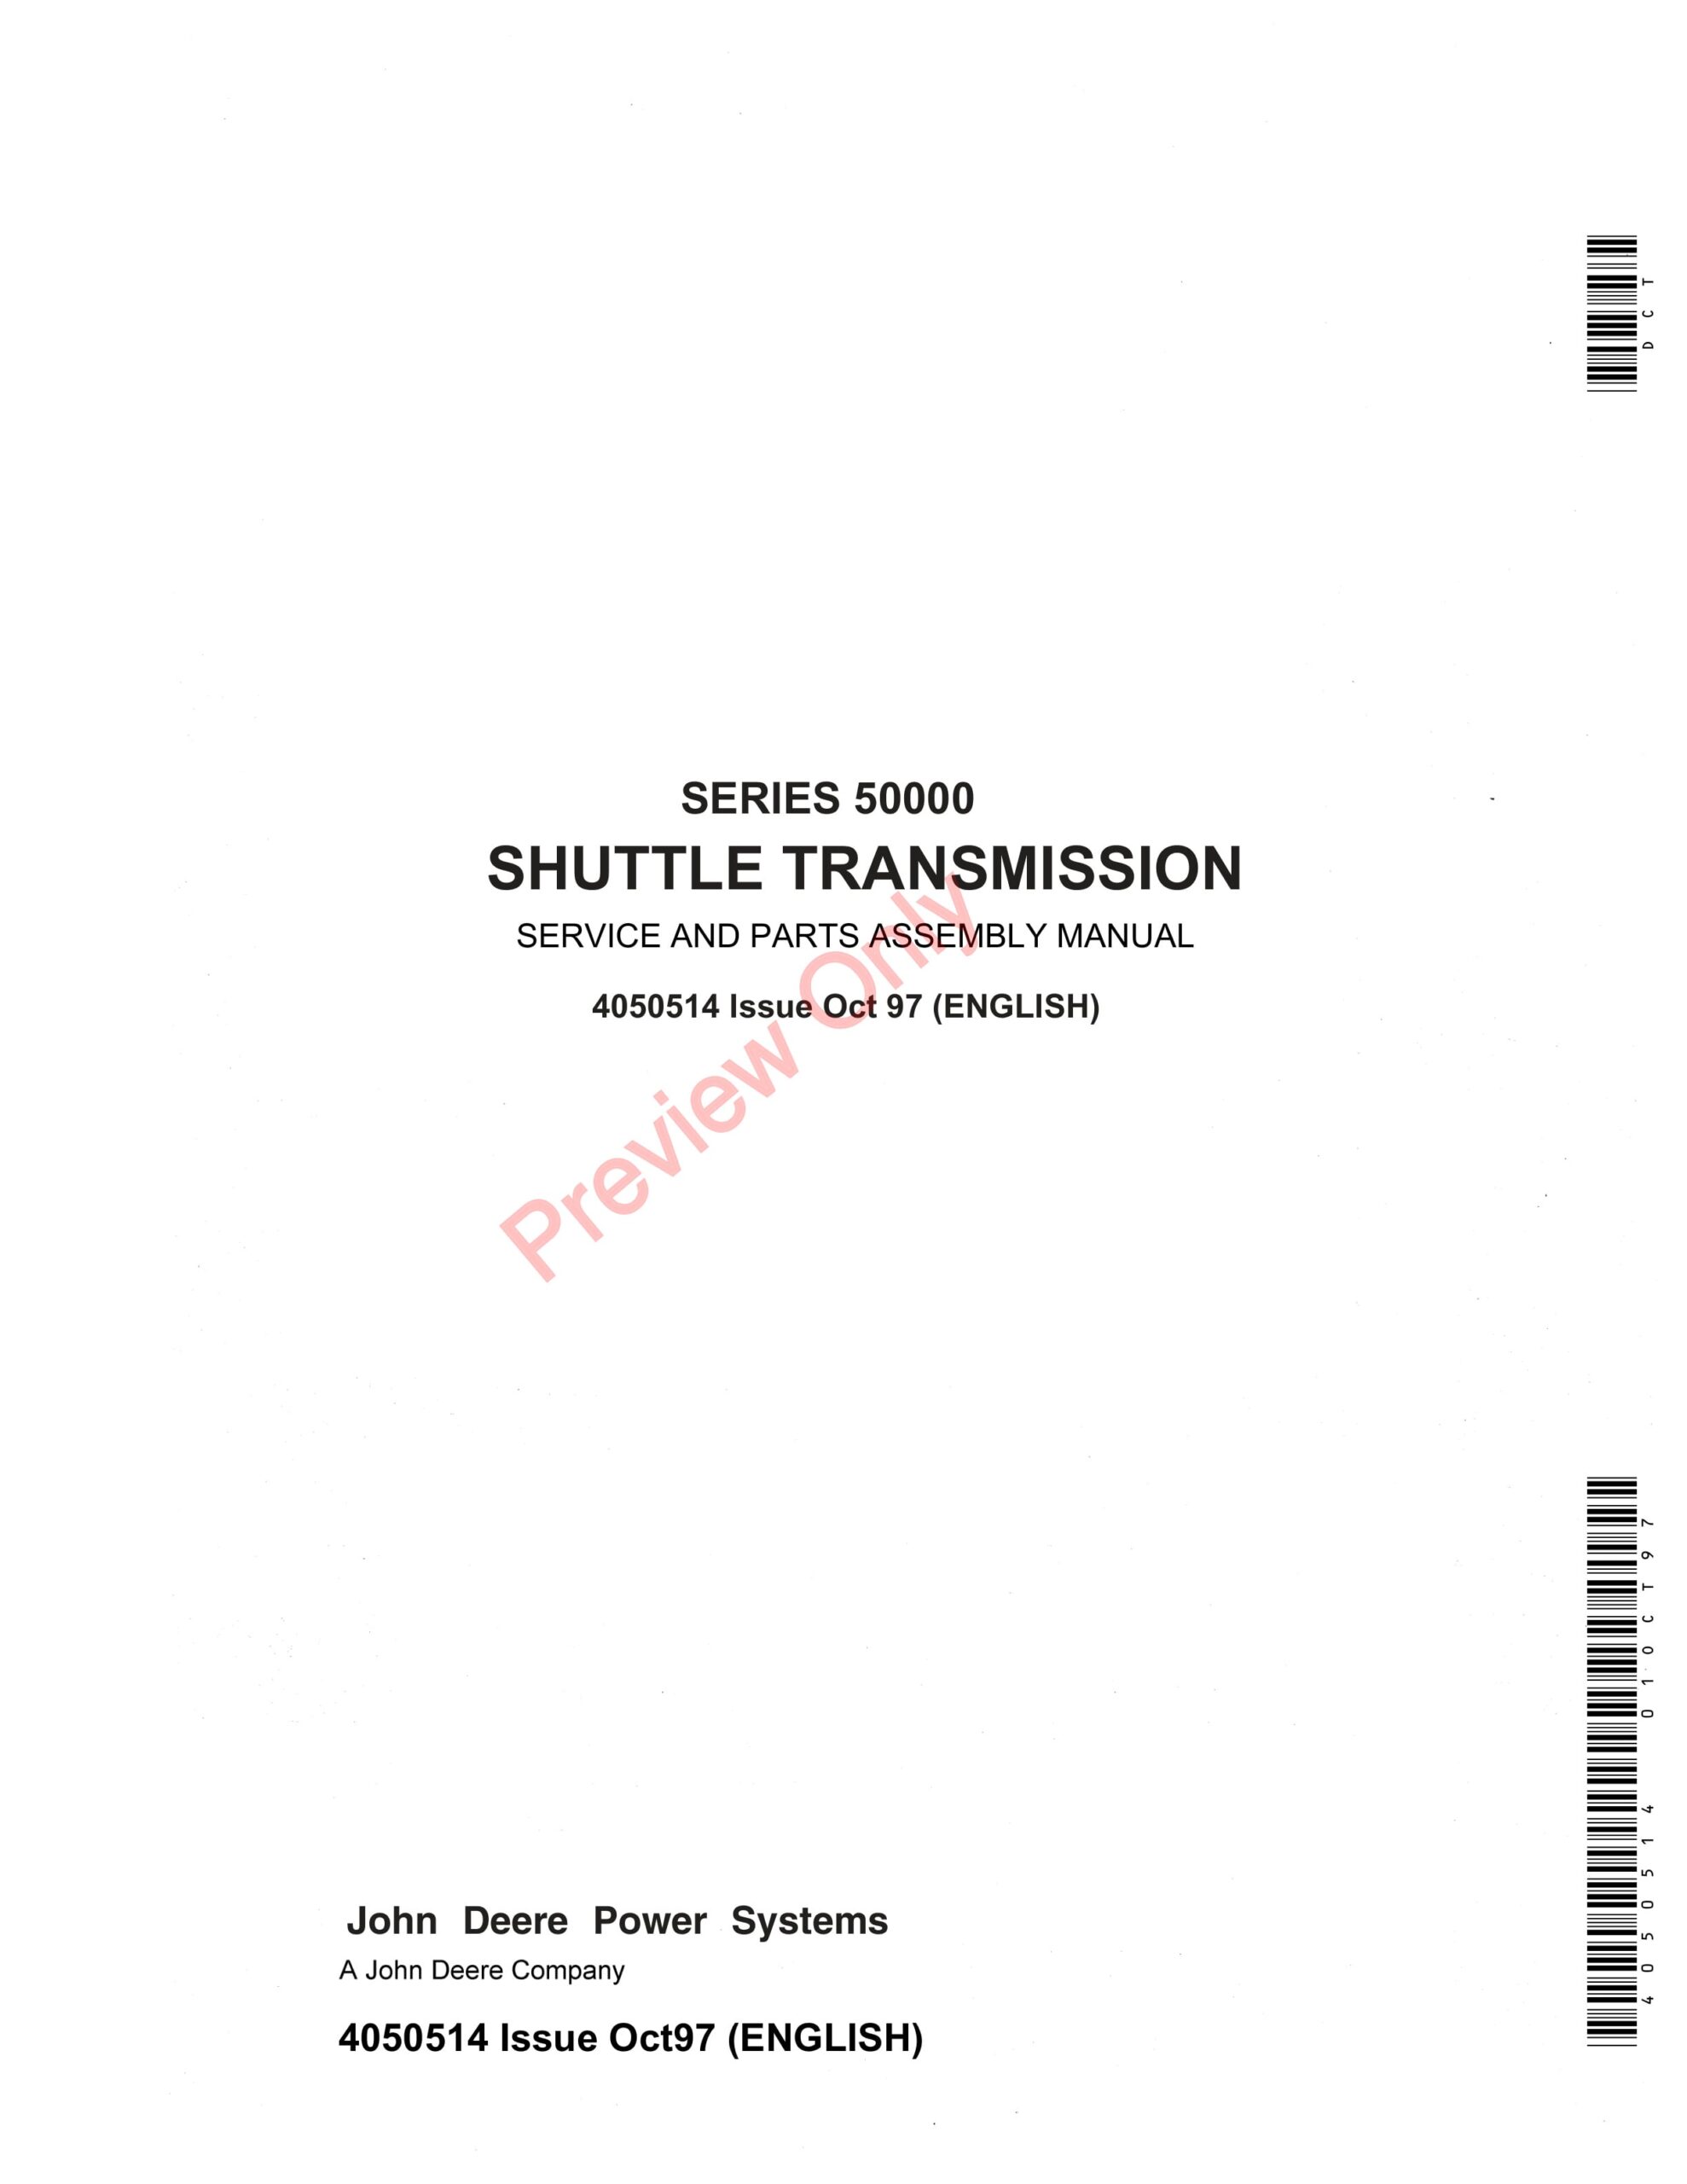 John Deere 50000 Series Shuttle Transmission Service and Parts Assembly Manual 4050514 01OCT97-1